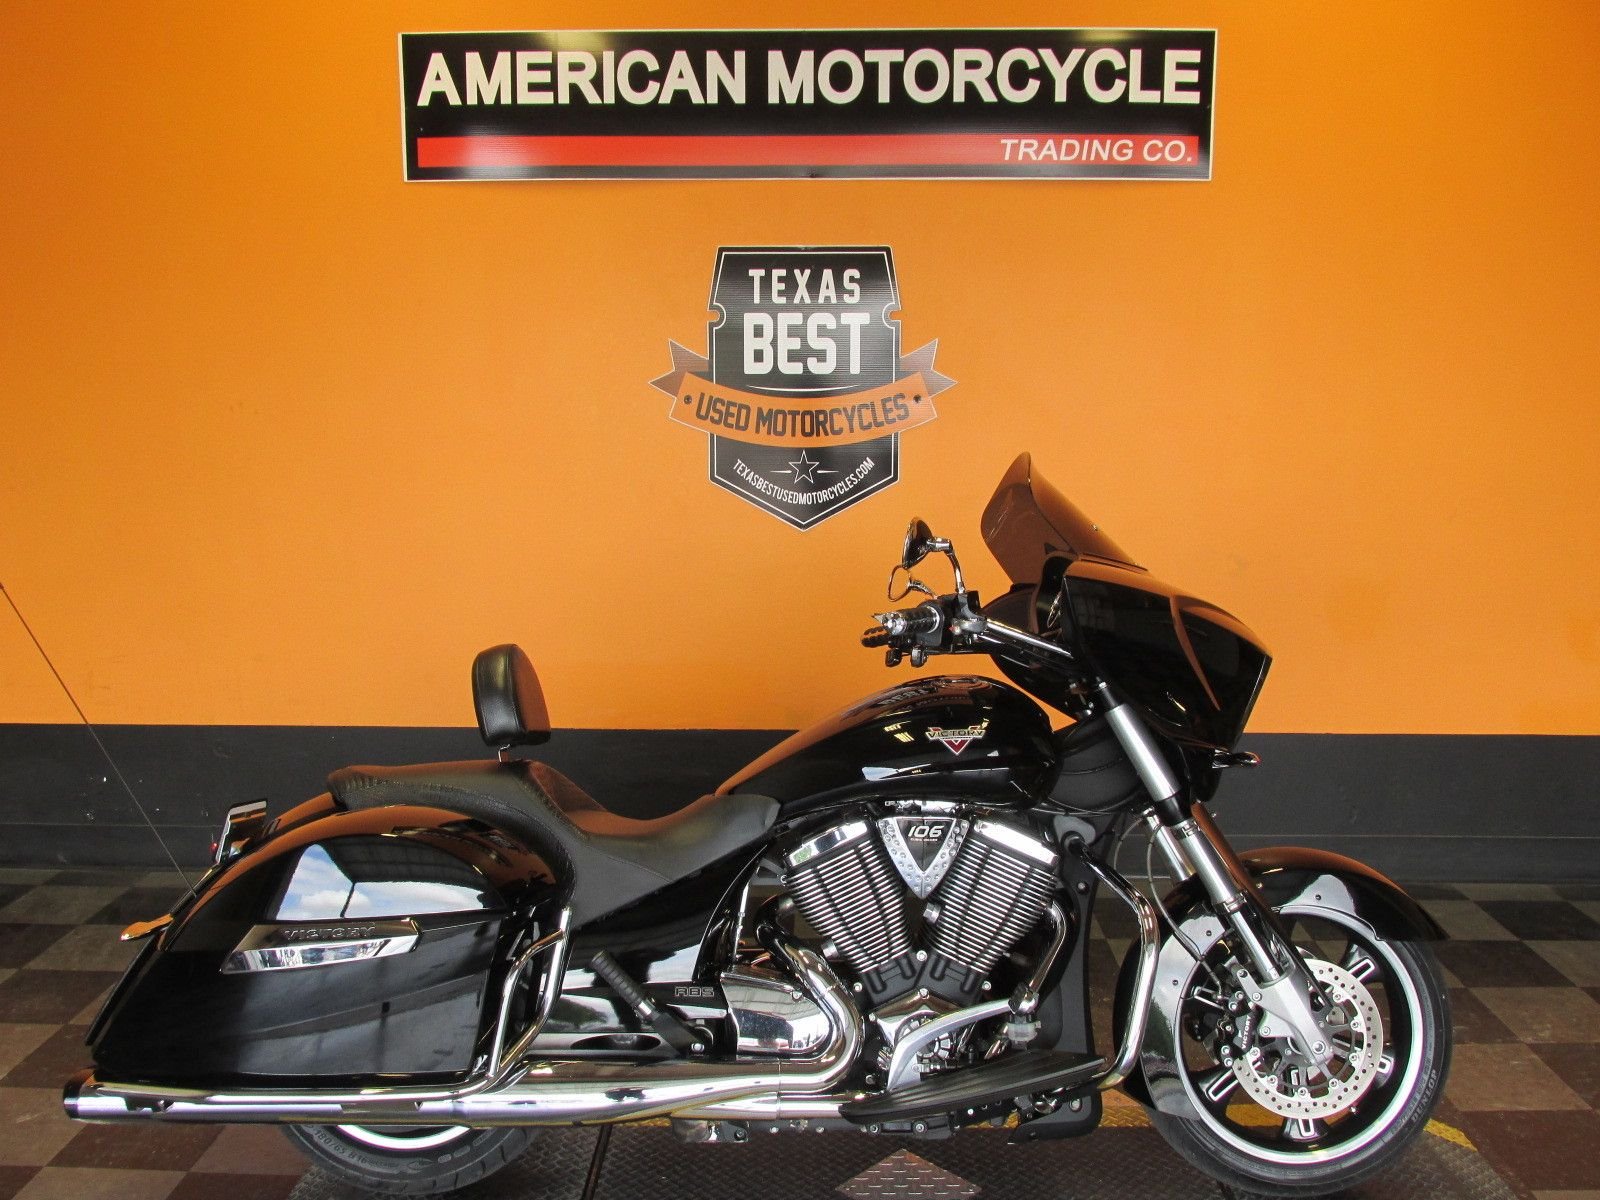 2014 victory cross country tour value